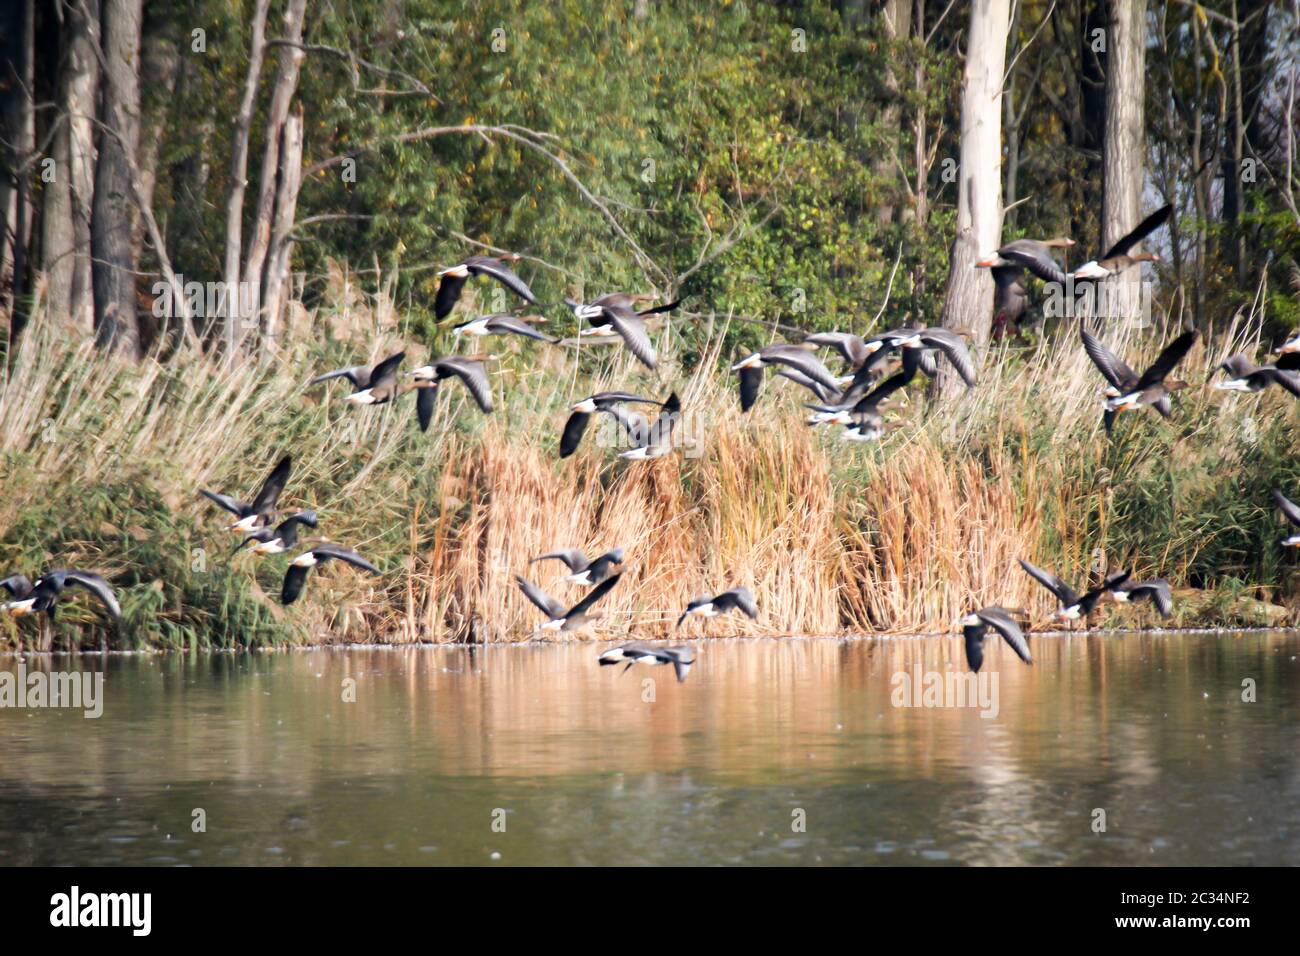 Wild geese gather at a large pond Stock Photo